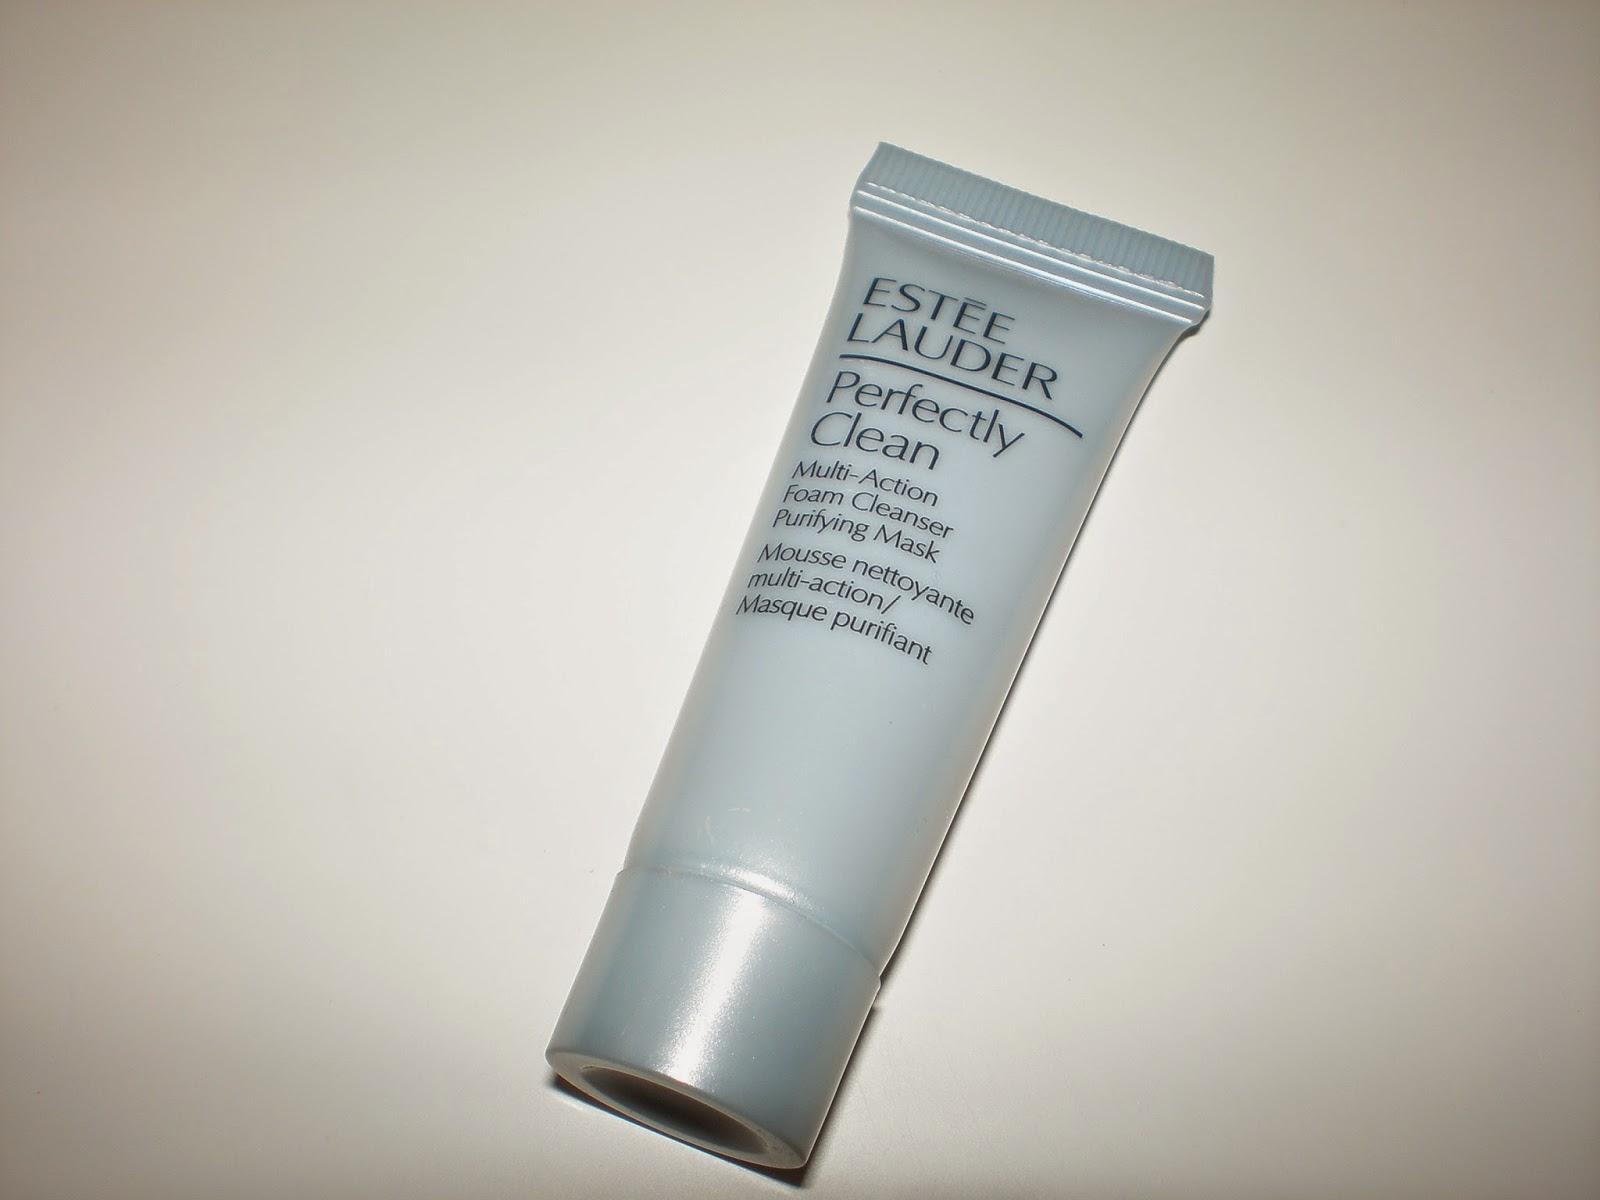      Estee Lauder Perfectly Clean Multi-Action Foam Cleanser Purifying Mask